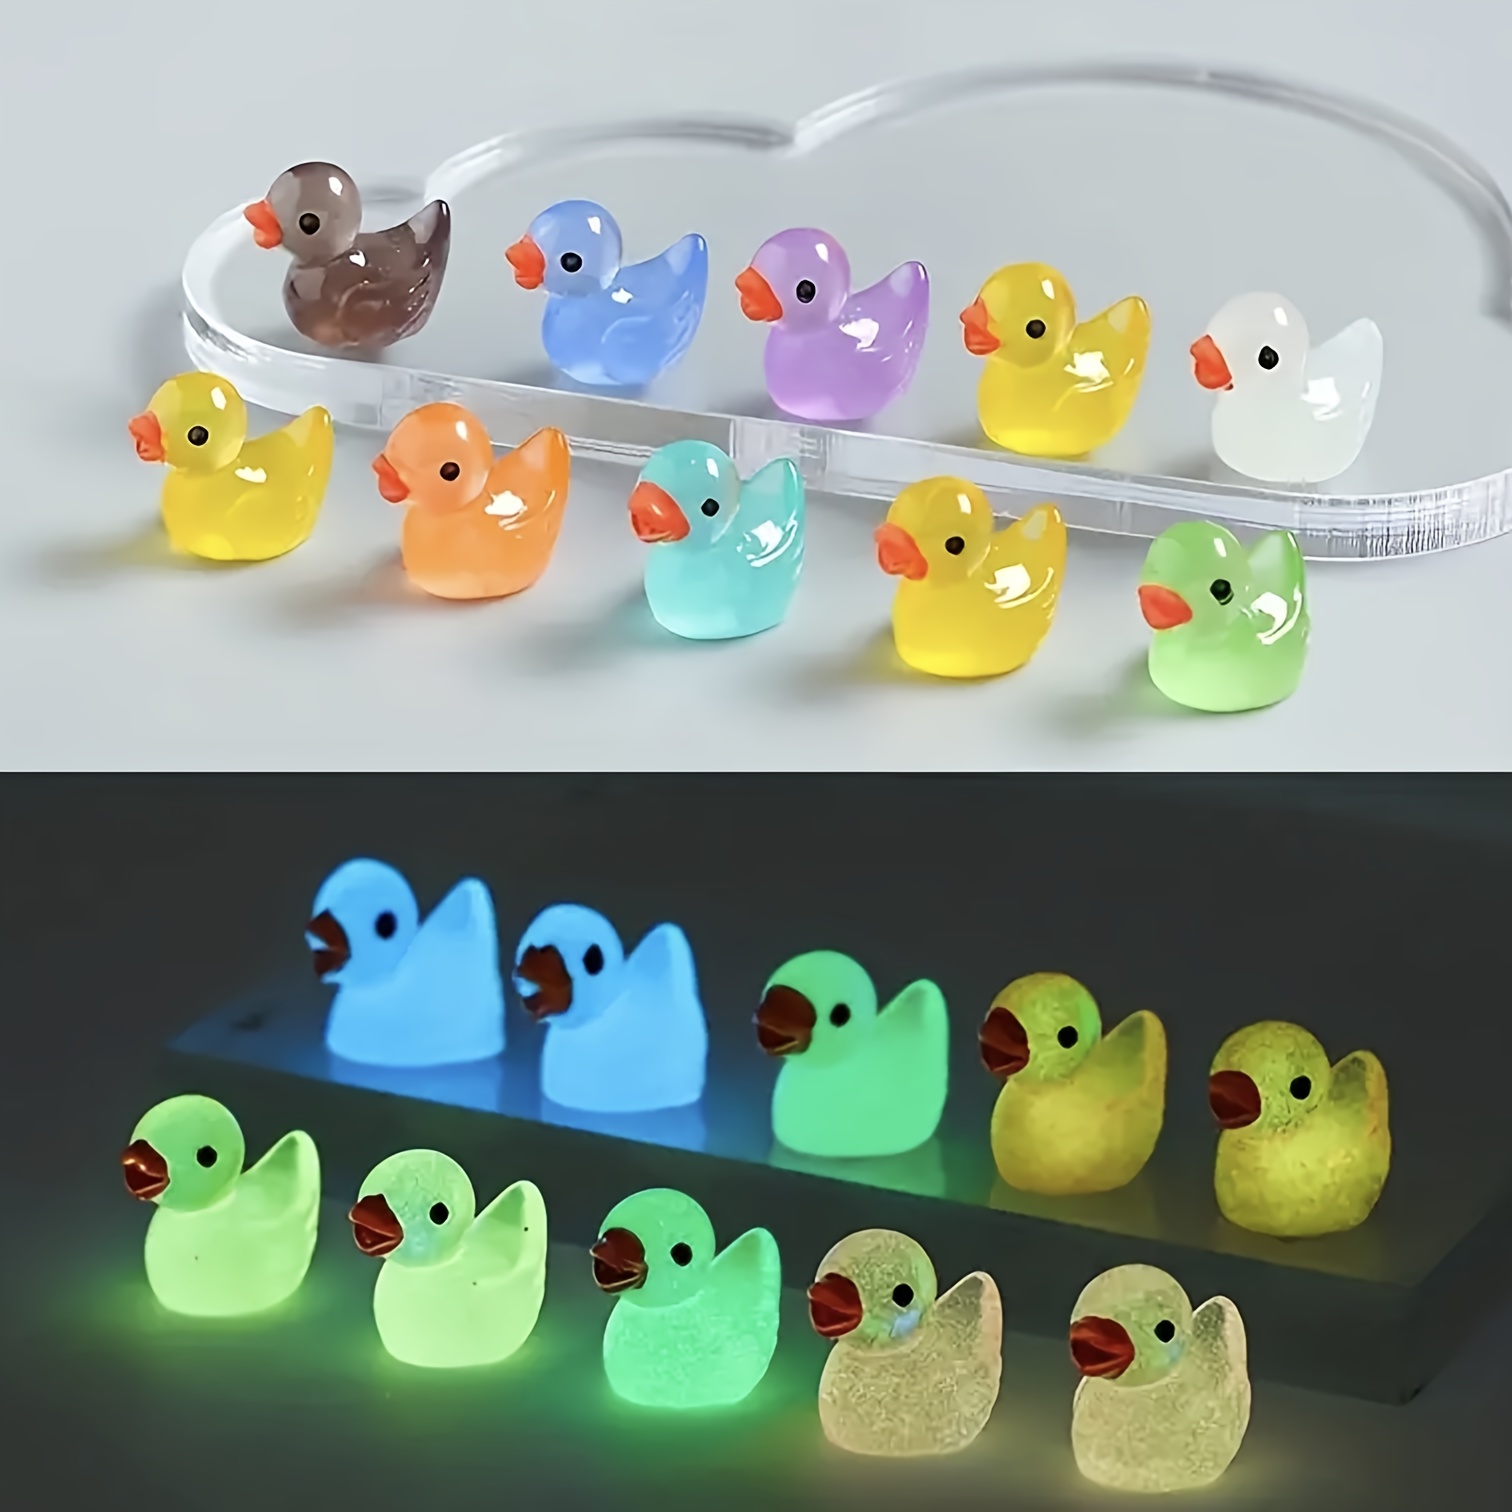 

20pcs Mini Light Up Ducks, Car Decorations, Cute Resin Creative Handmade Decorations, Holiday Party Favors, Birthday Gifts, Interior Decorations, Home Decorations, Scene Decorations (random Colors)